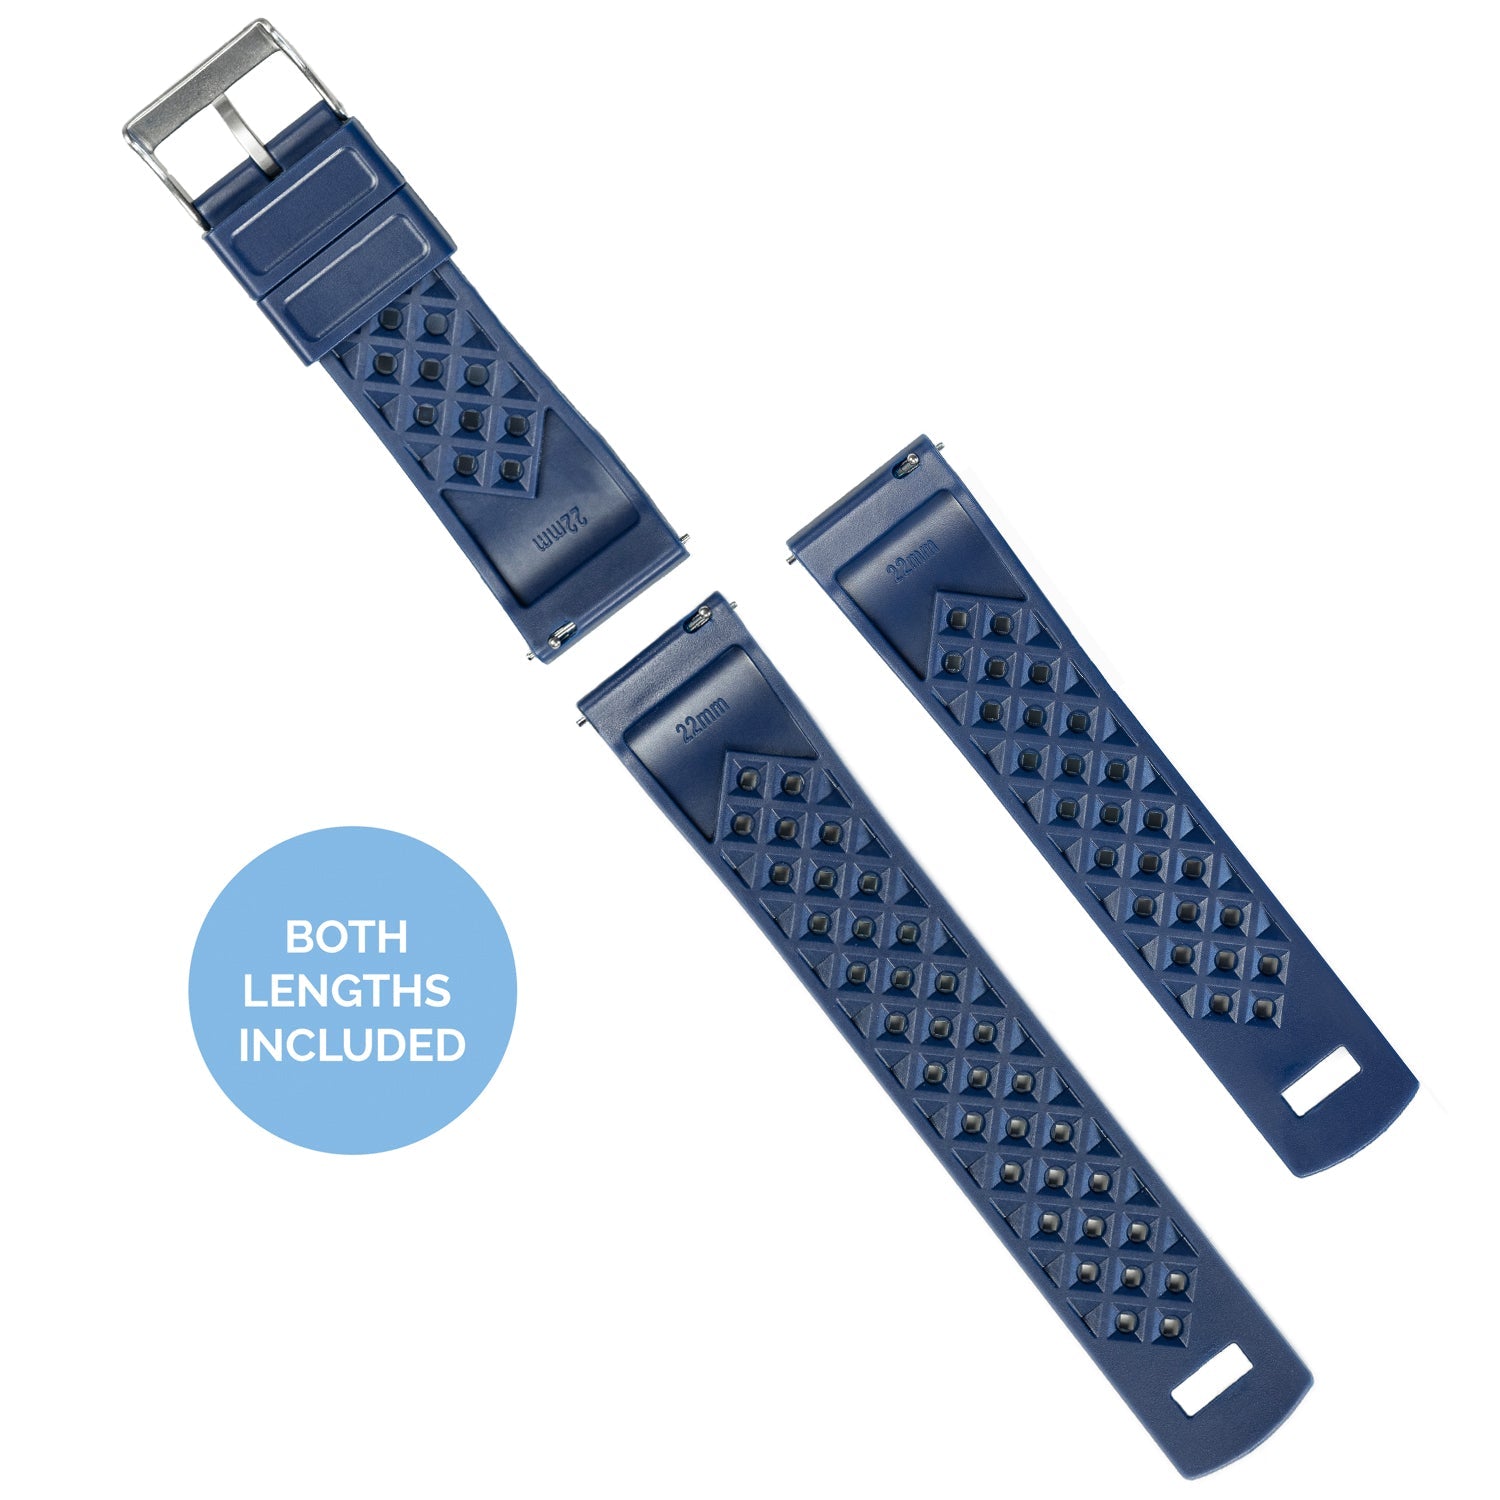 MOONSWATCH Bip | Tropical-Style | Navy Blue - Barton Watch Bands